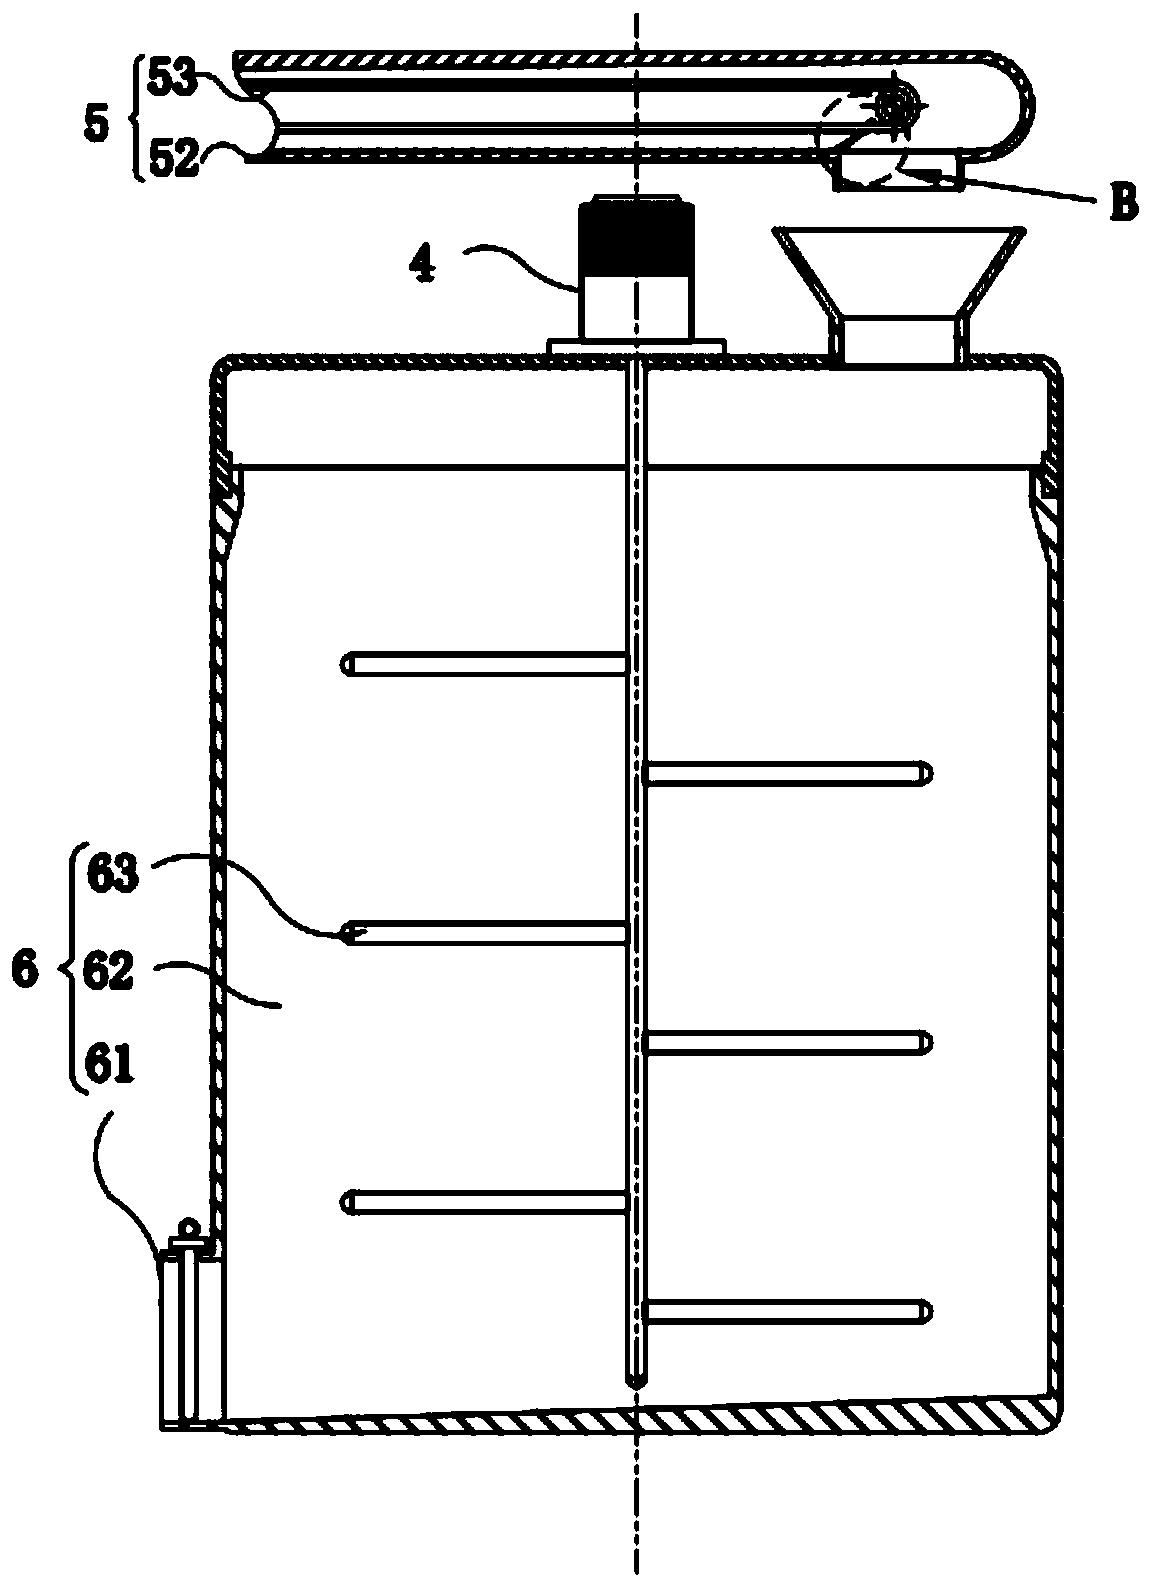 Crushing, cooking and fermenting integrated device for soy sauce processing and production